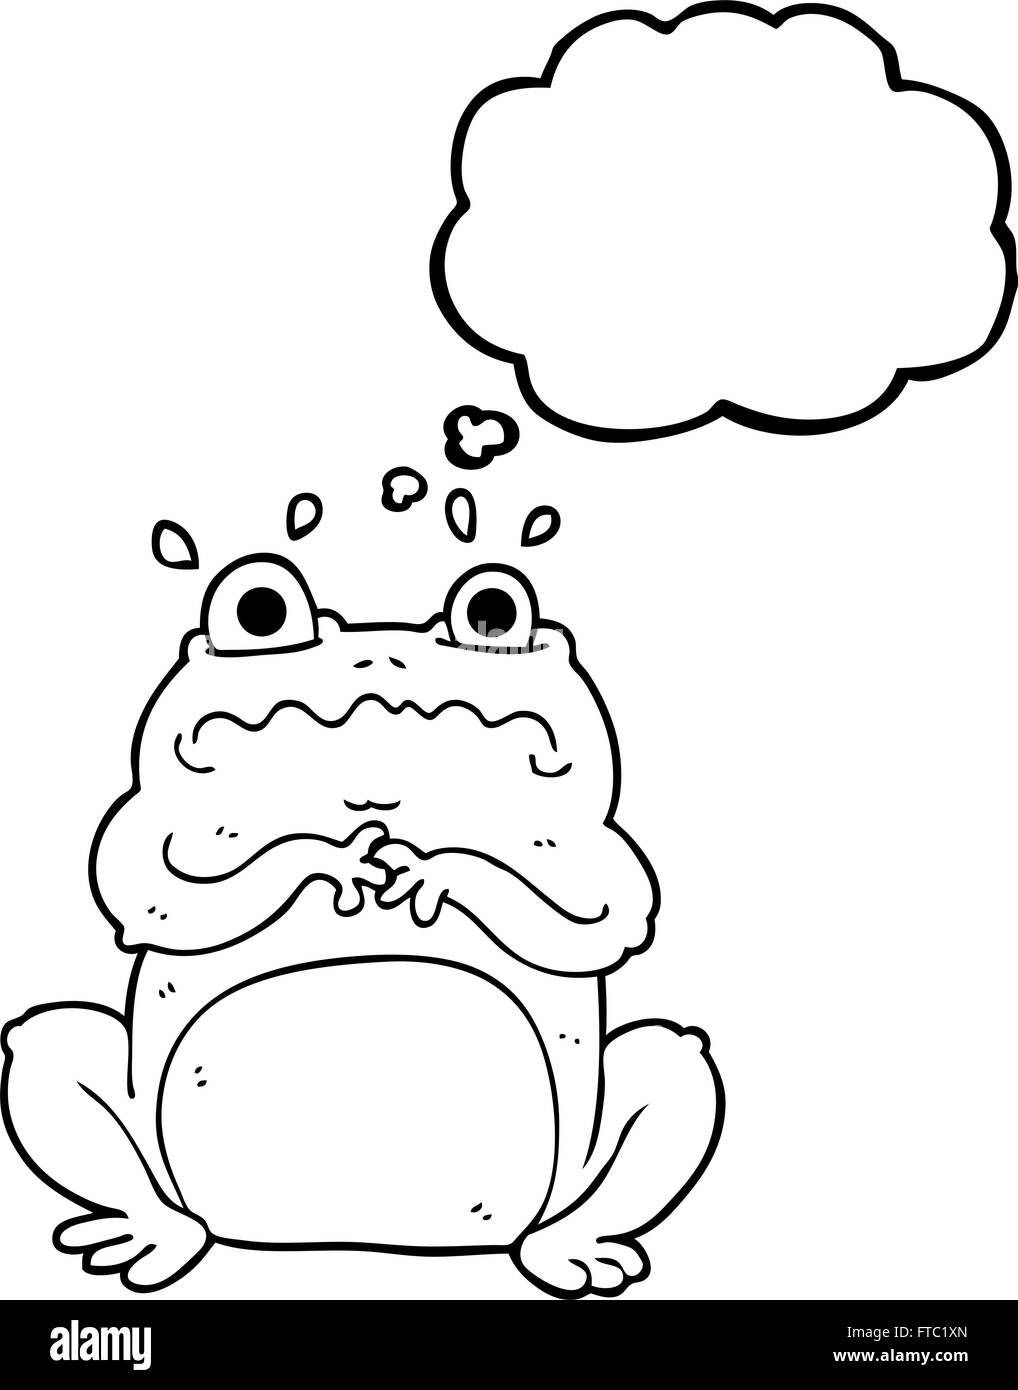 freehand drawn thought bubble cartoon funny frog Stock Vector